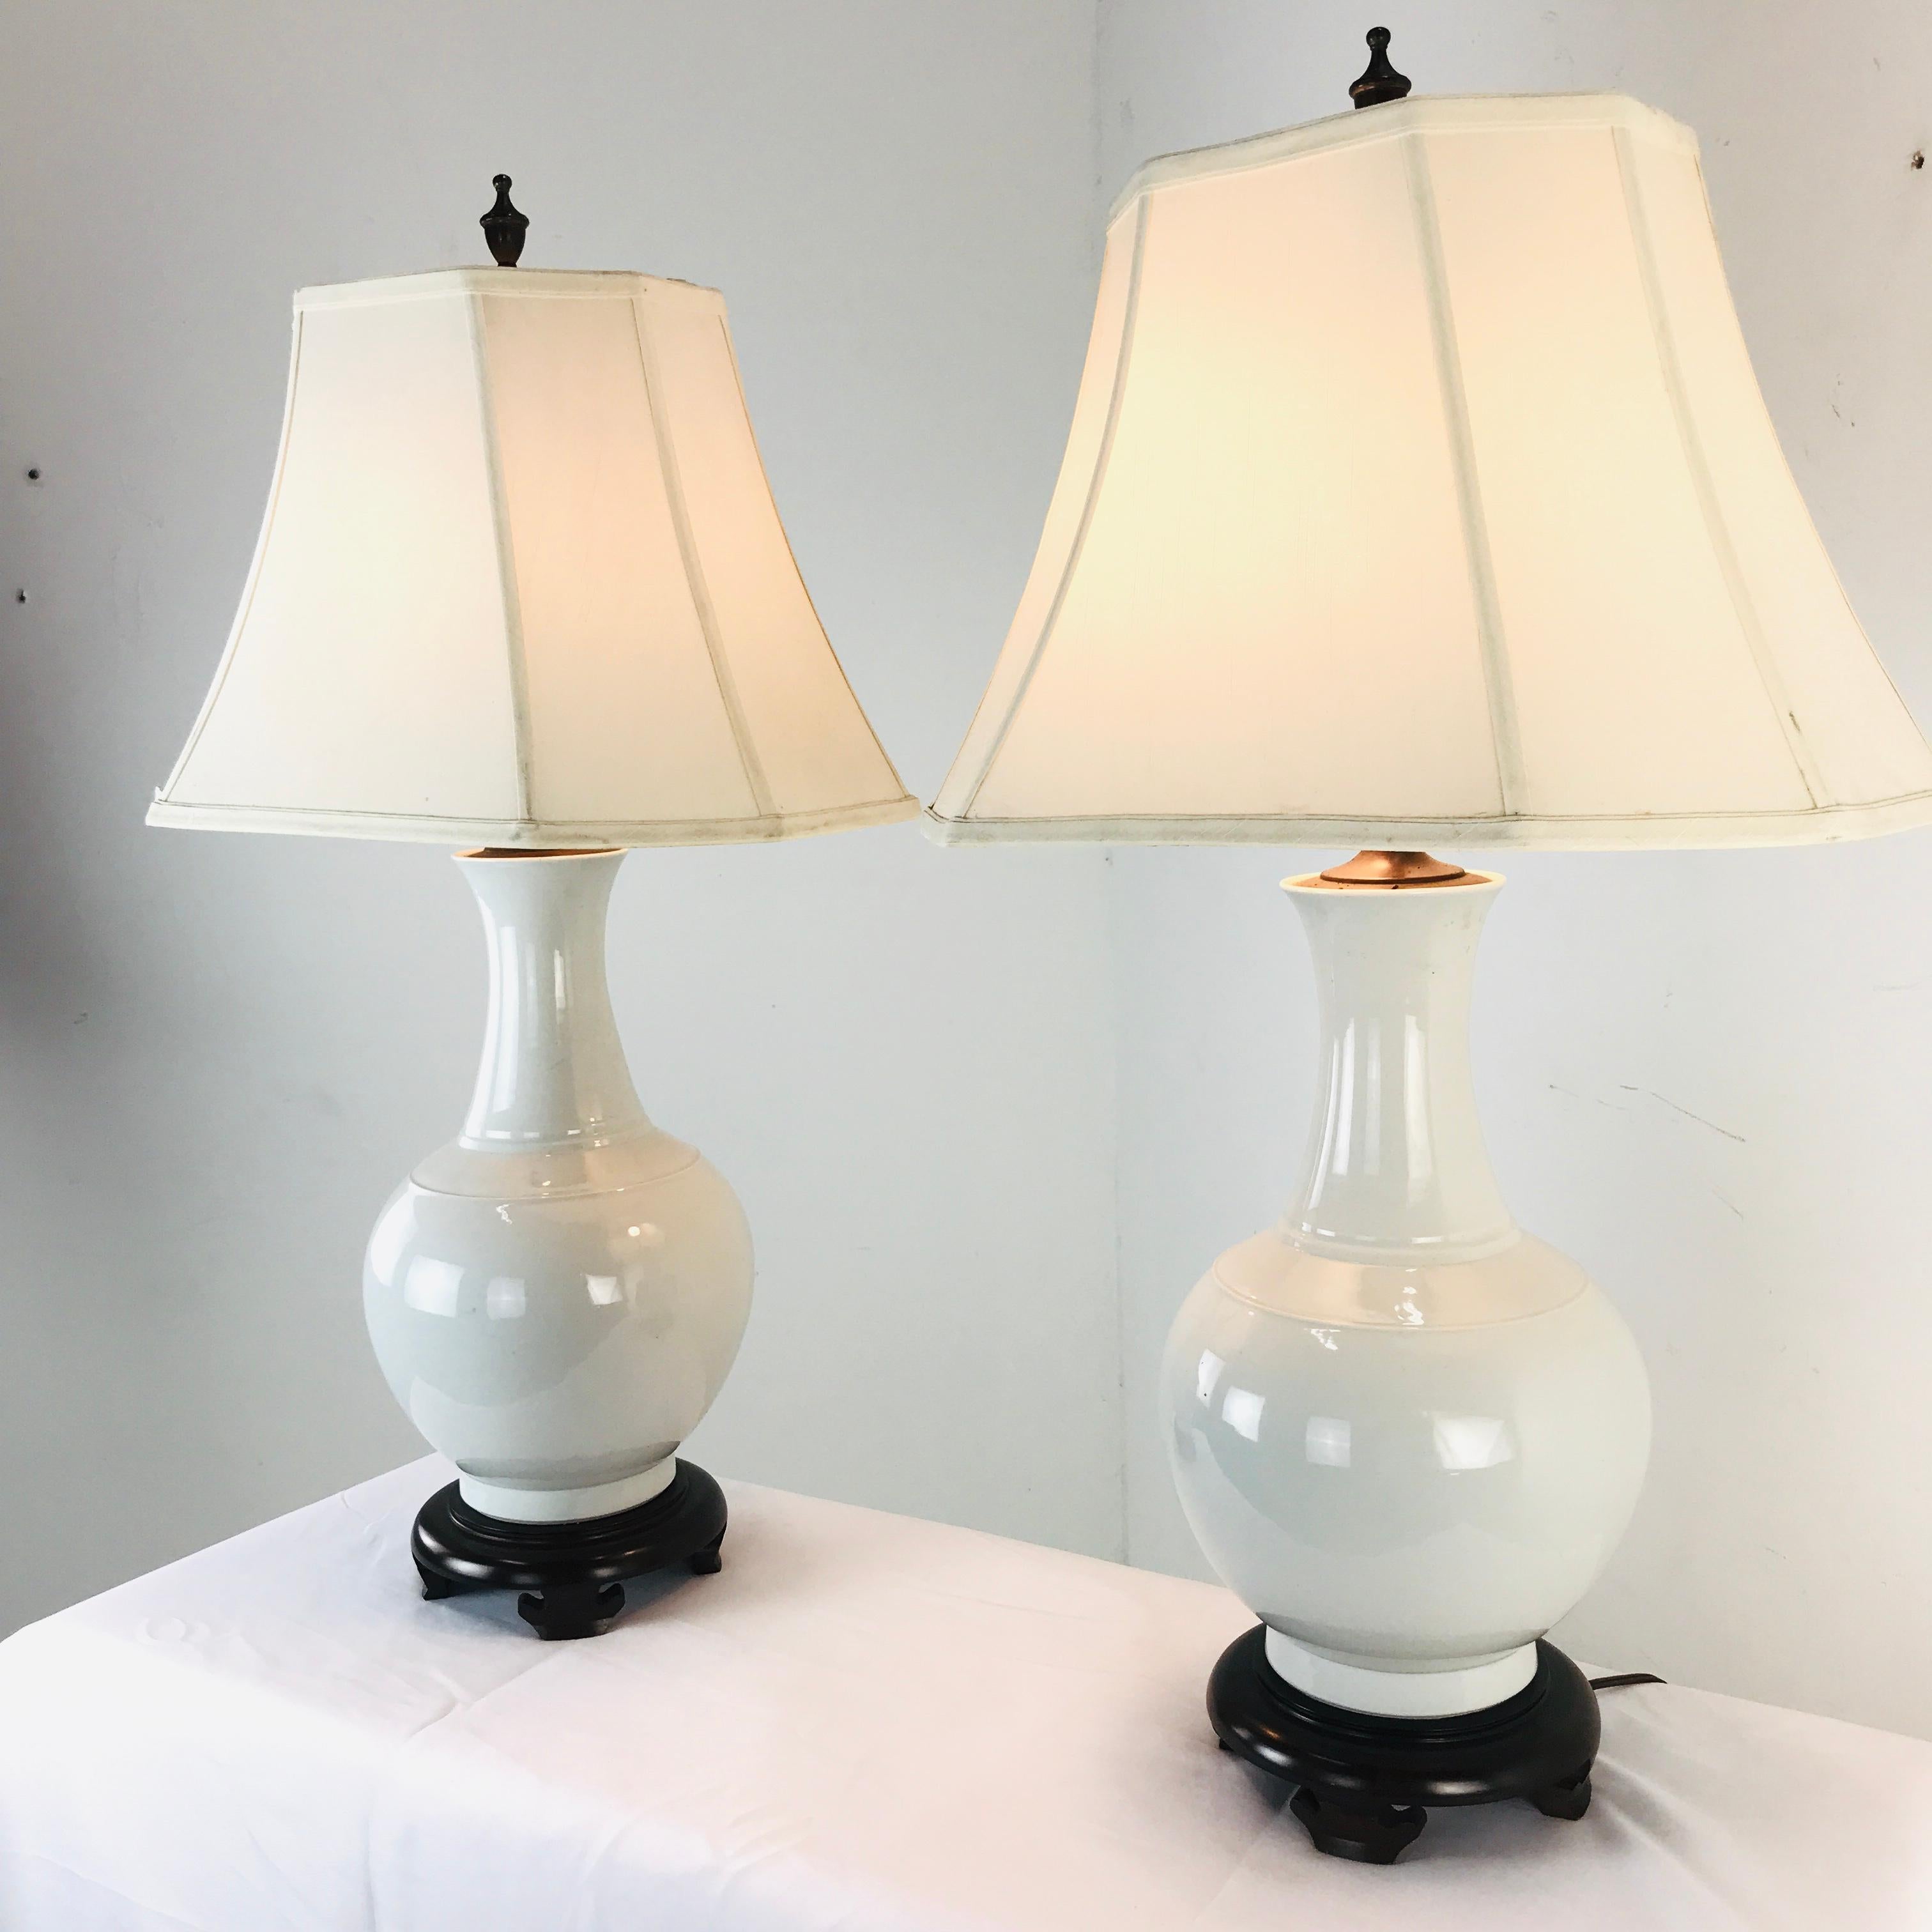 Pair of Porcelain Vase Lamps In Good Condition For Sale In Dallas, TX